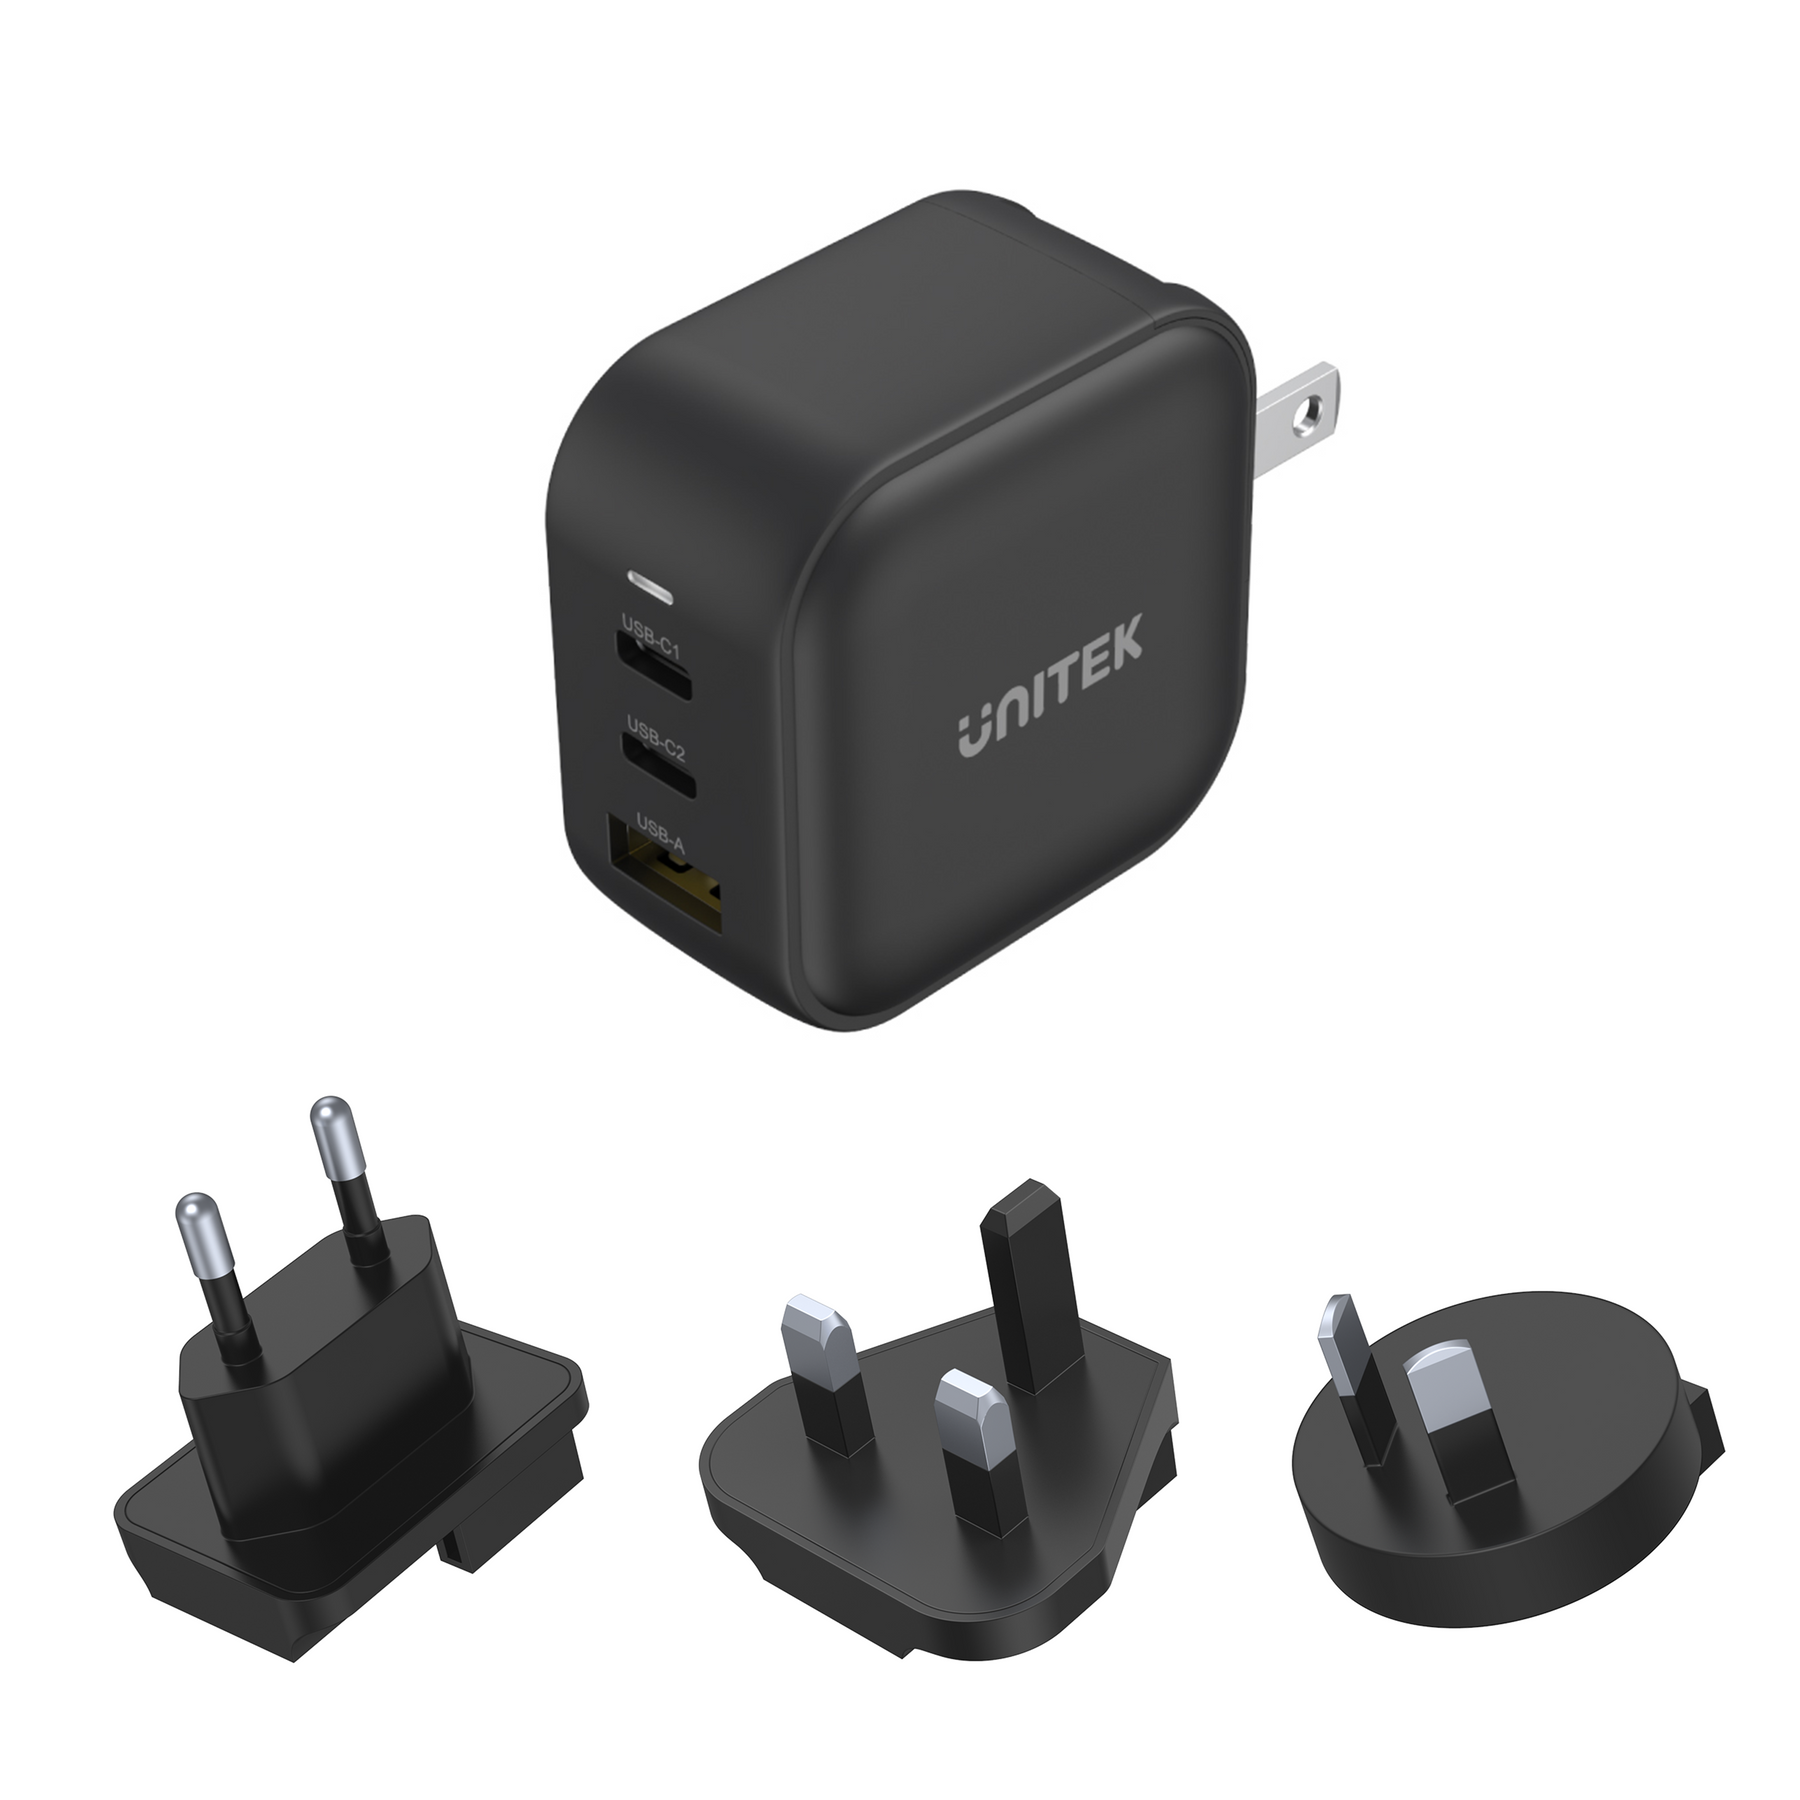 TRAVEL TRI GaN 3 Ports 66W Charger with USB PD and QC 3.0 in Black (Tr